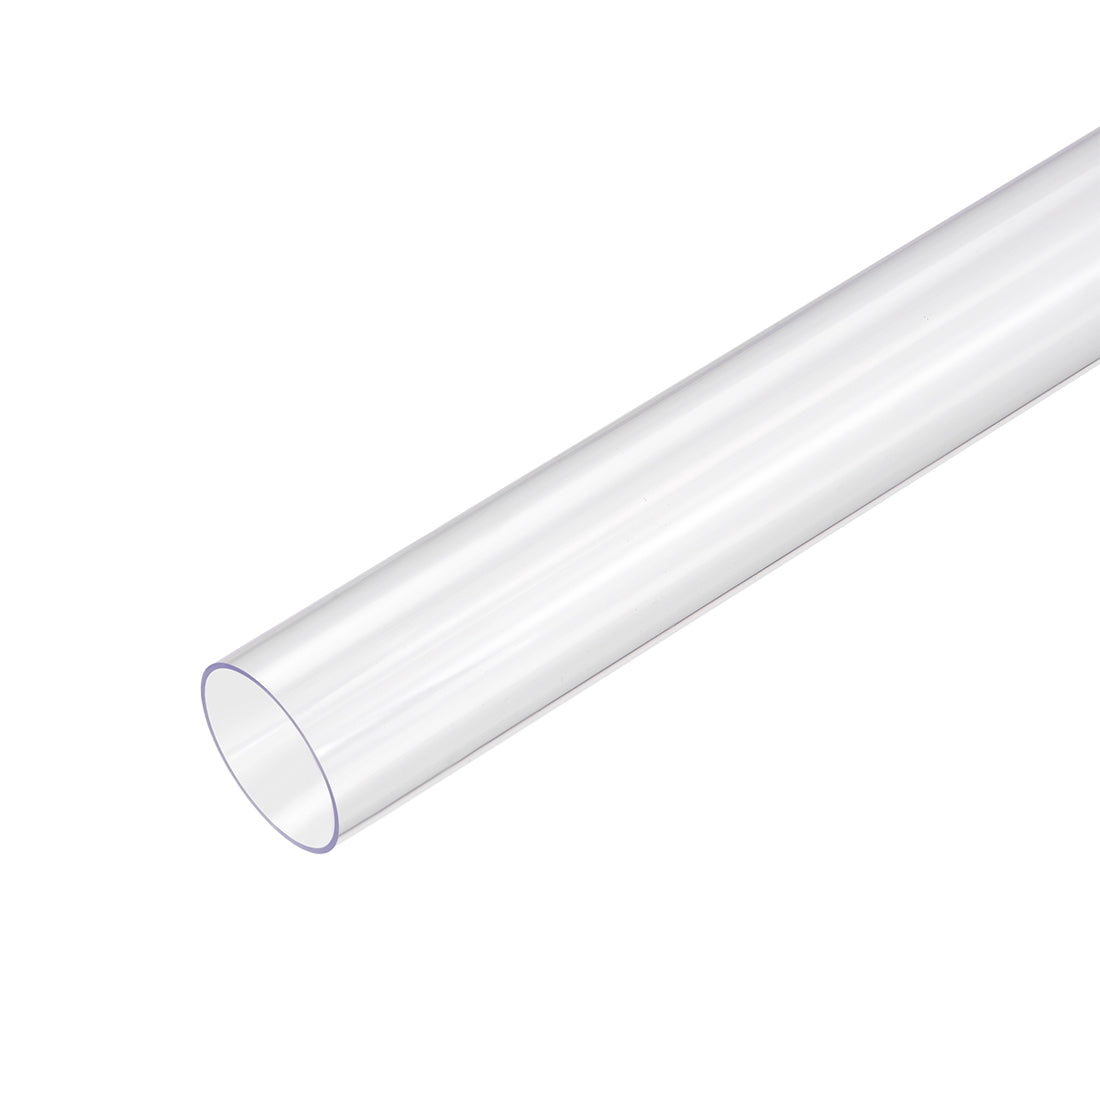 uxcell Uxcell PVC Rigid Round Tubing,Clear,30mm ID x 32mm OD,0.5M/1.64Ft Length,3pcs